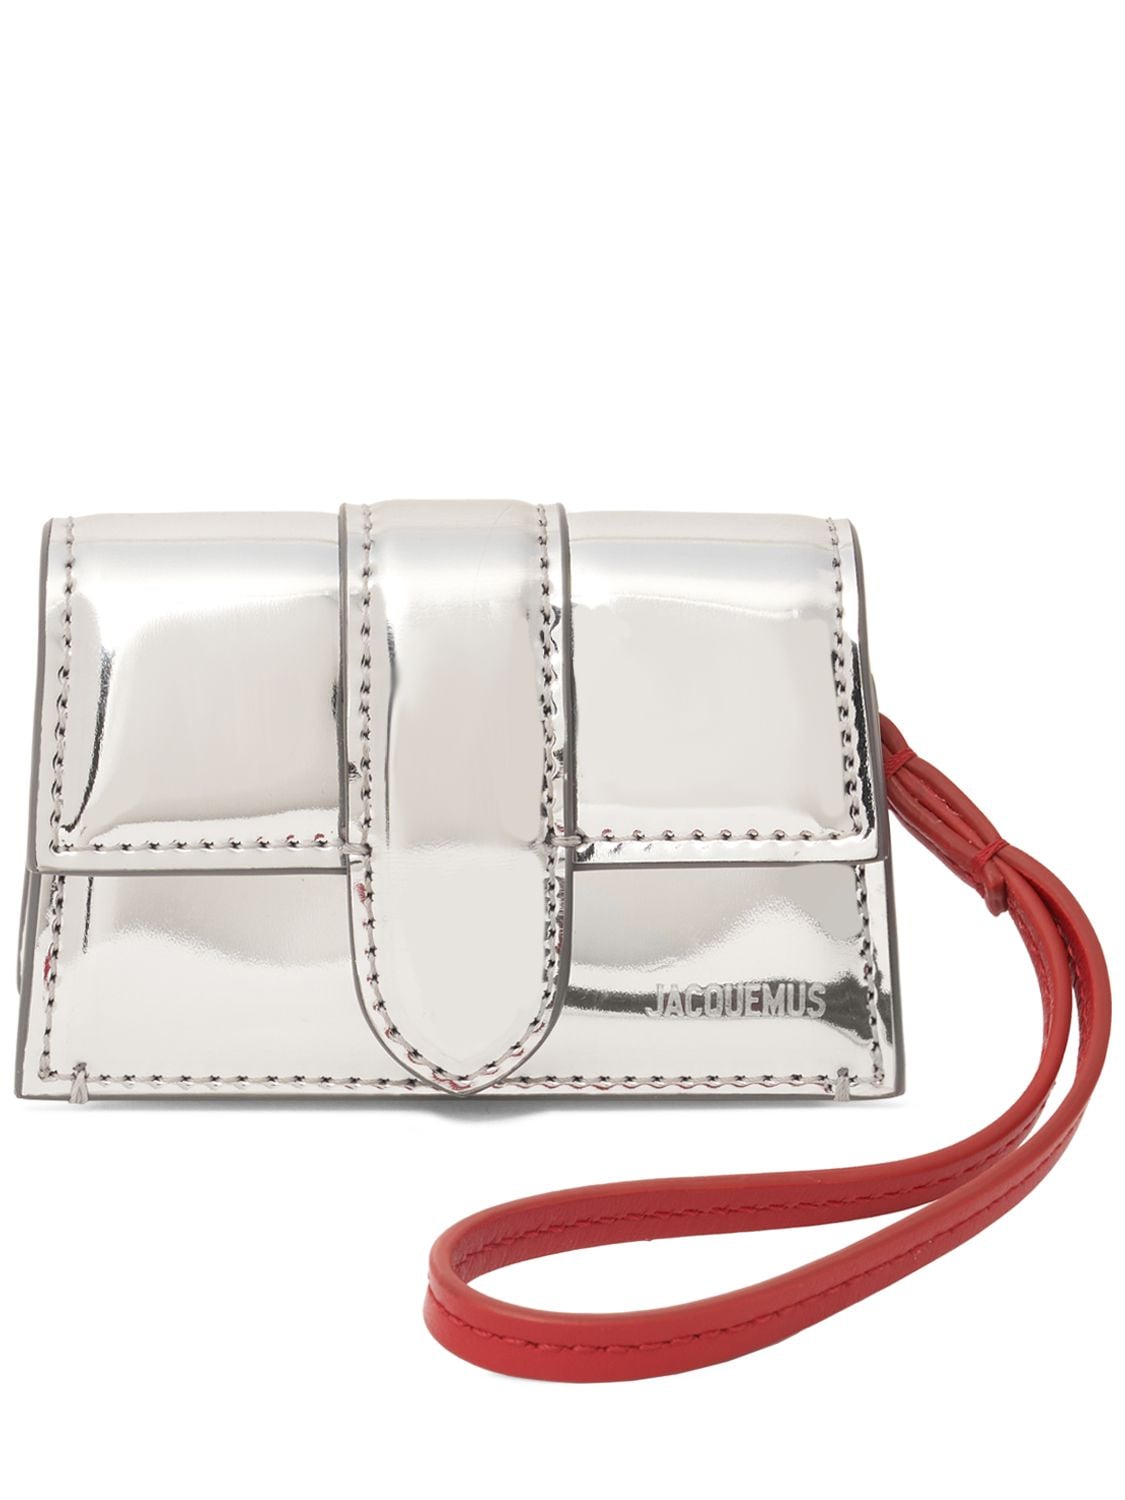 JACQUEMUS LE BAMBINO LEATHER CARD HOLDER